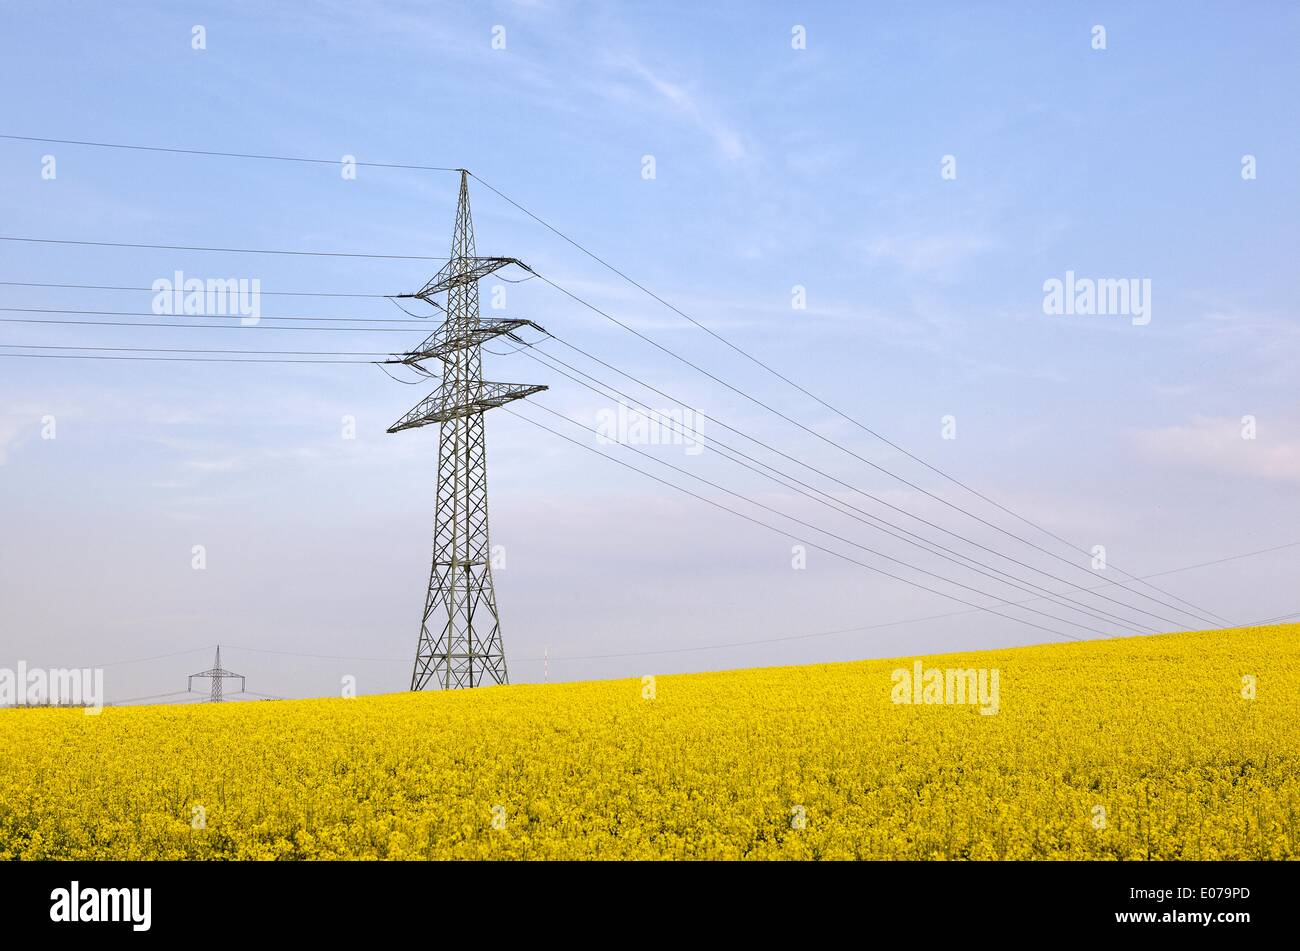 Electricity pylon under blue sky next to a blooming rapeseed field. 29.04.2014 Stock Photo